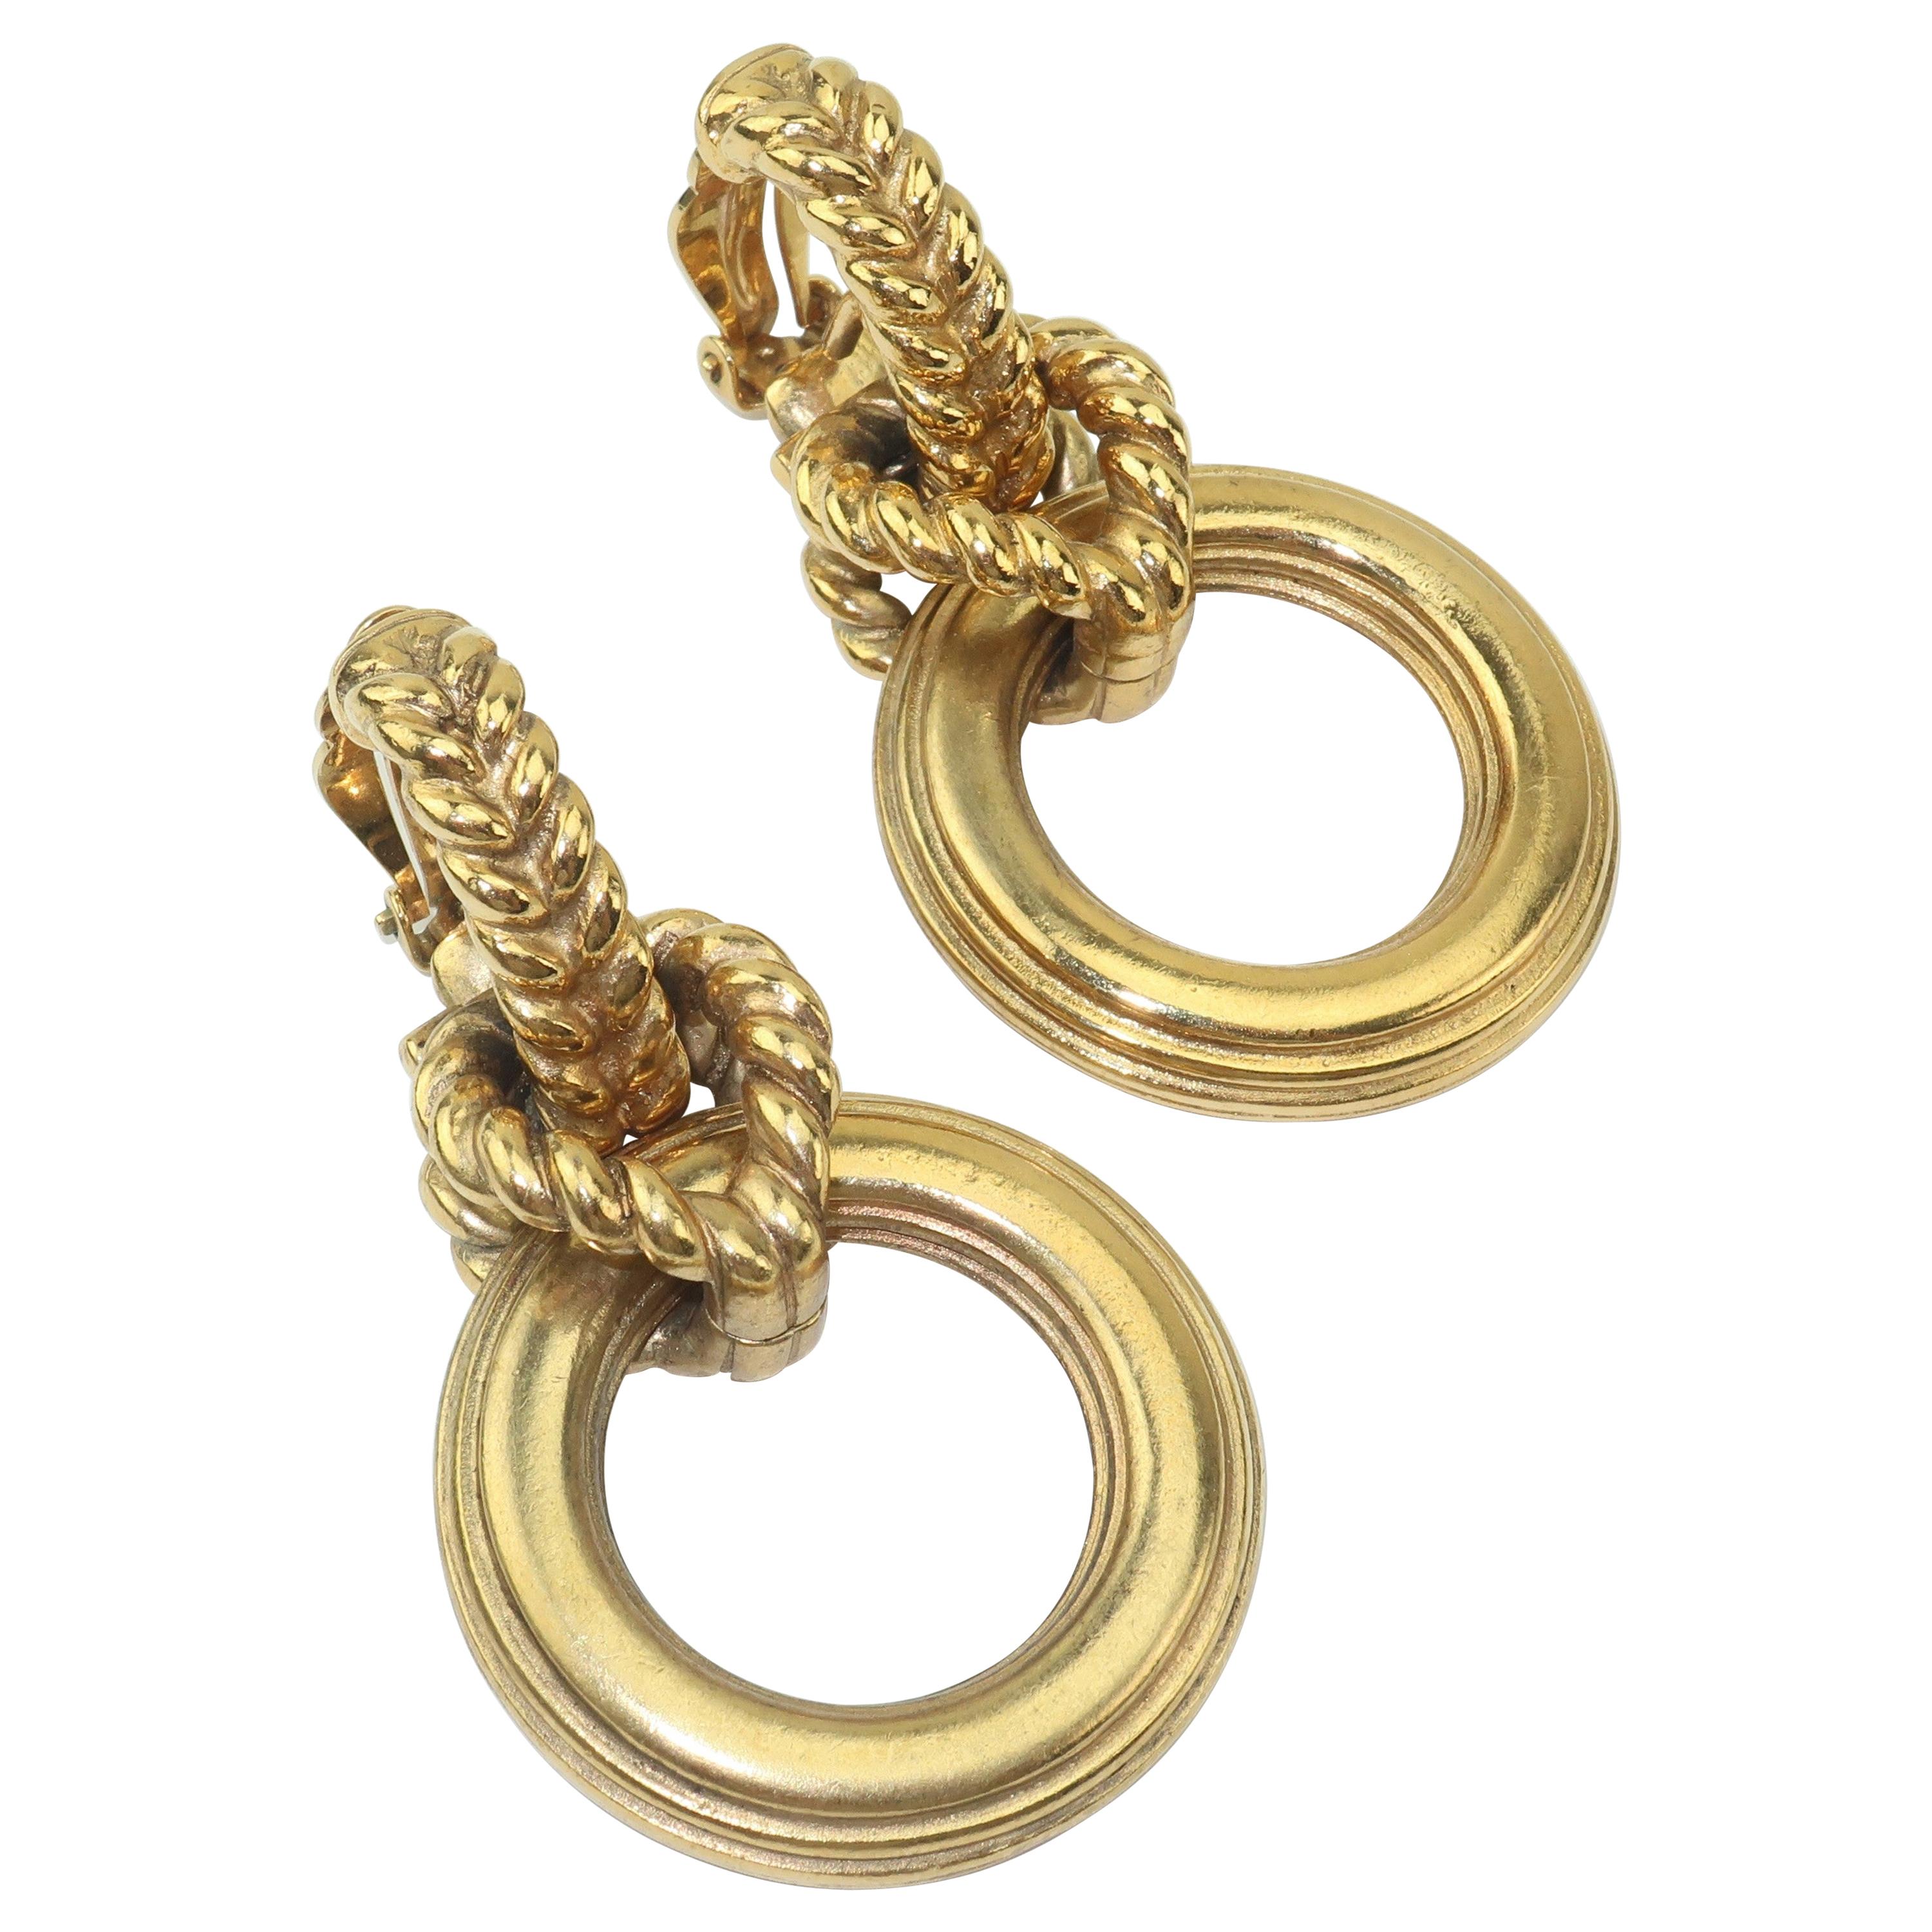 Robert Goossens is a name synonymous with the opulent costume jewelry produced for great Parisian fashion houses such as Chanel and Yves Saint Laurent. These 1980's door knocker earrings are a nice example of his stylish work with a chunky statement